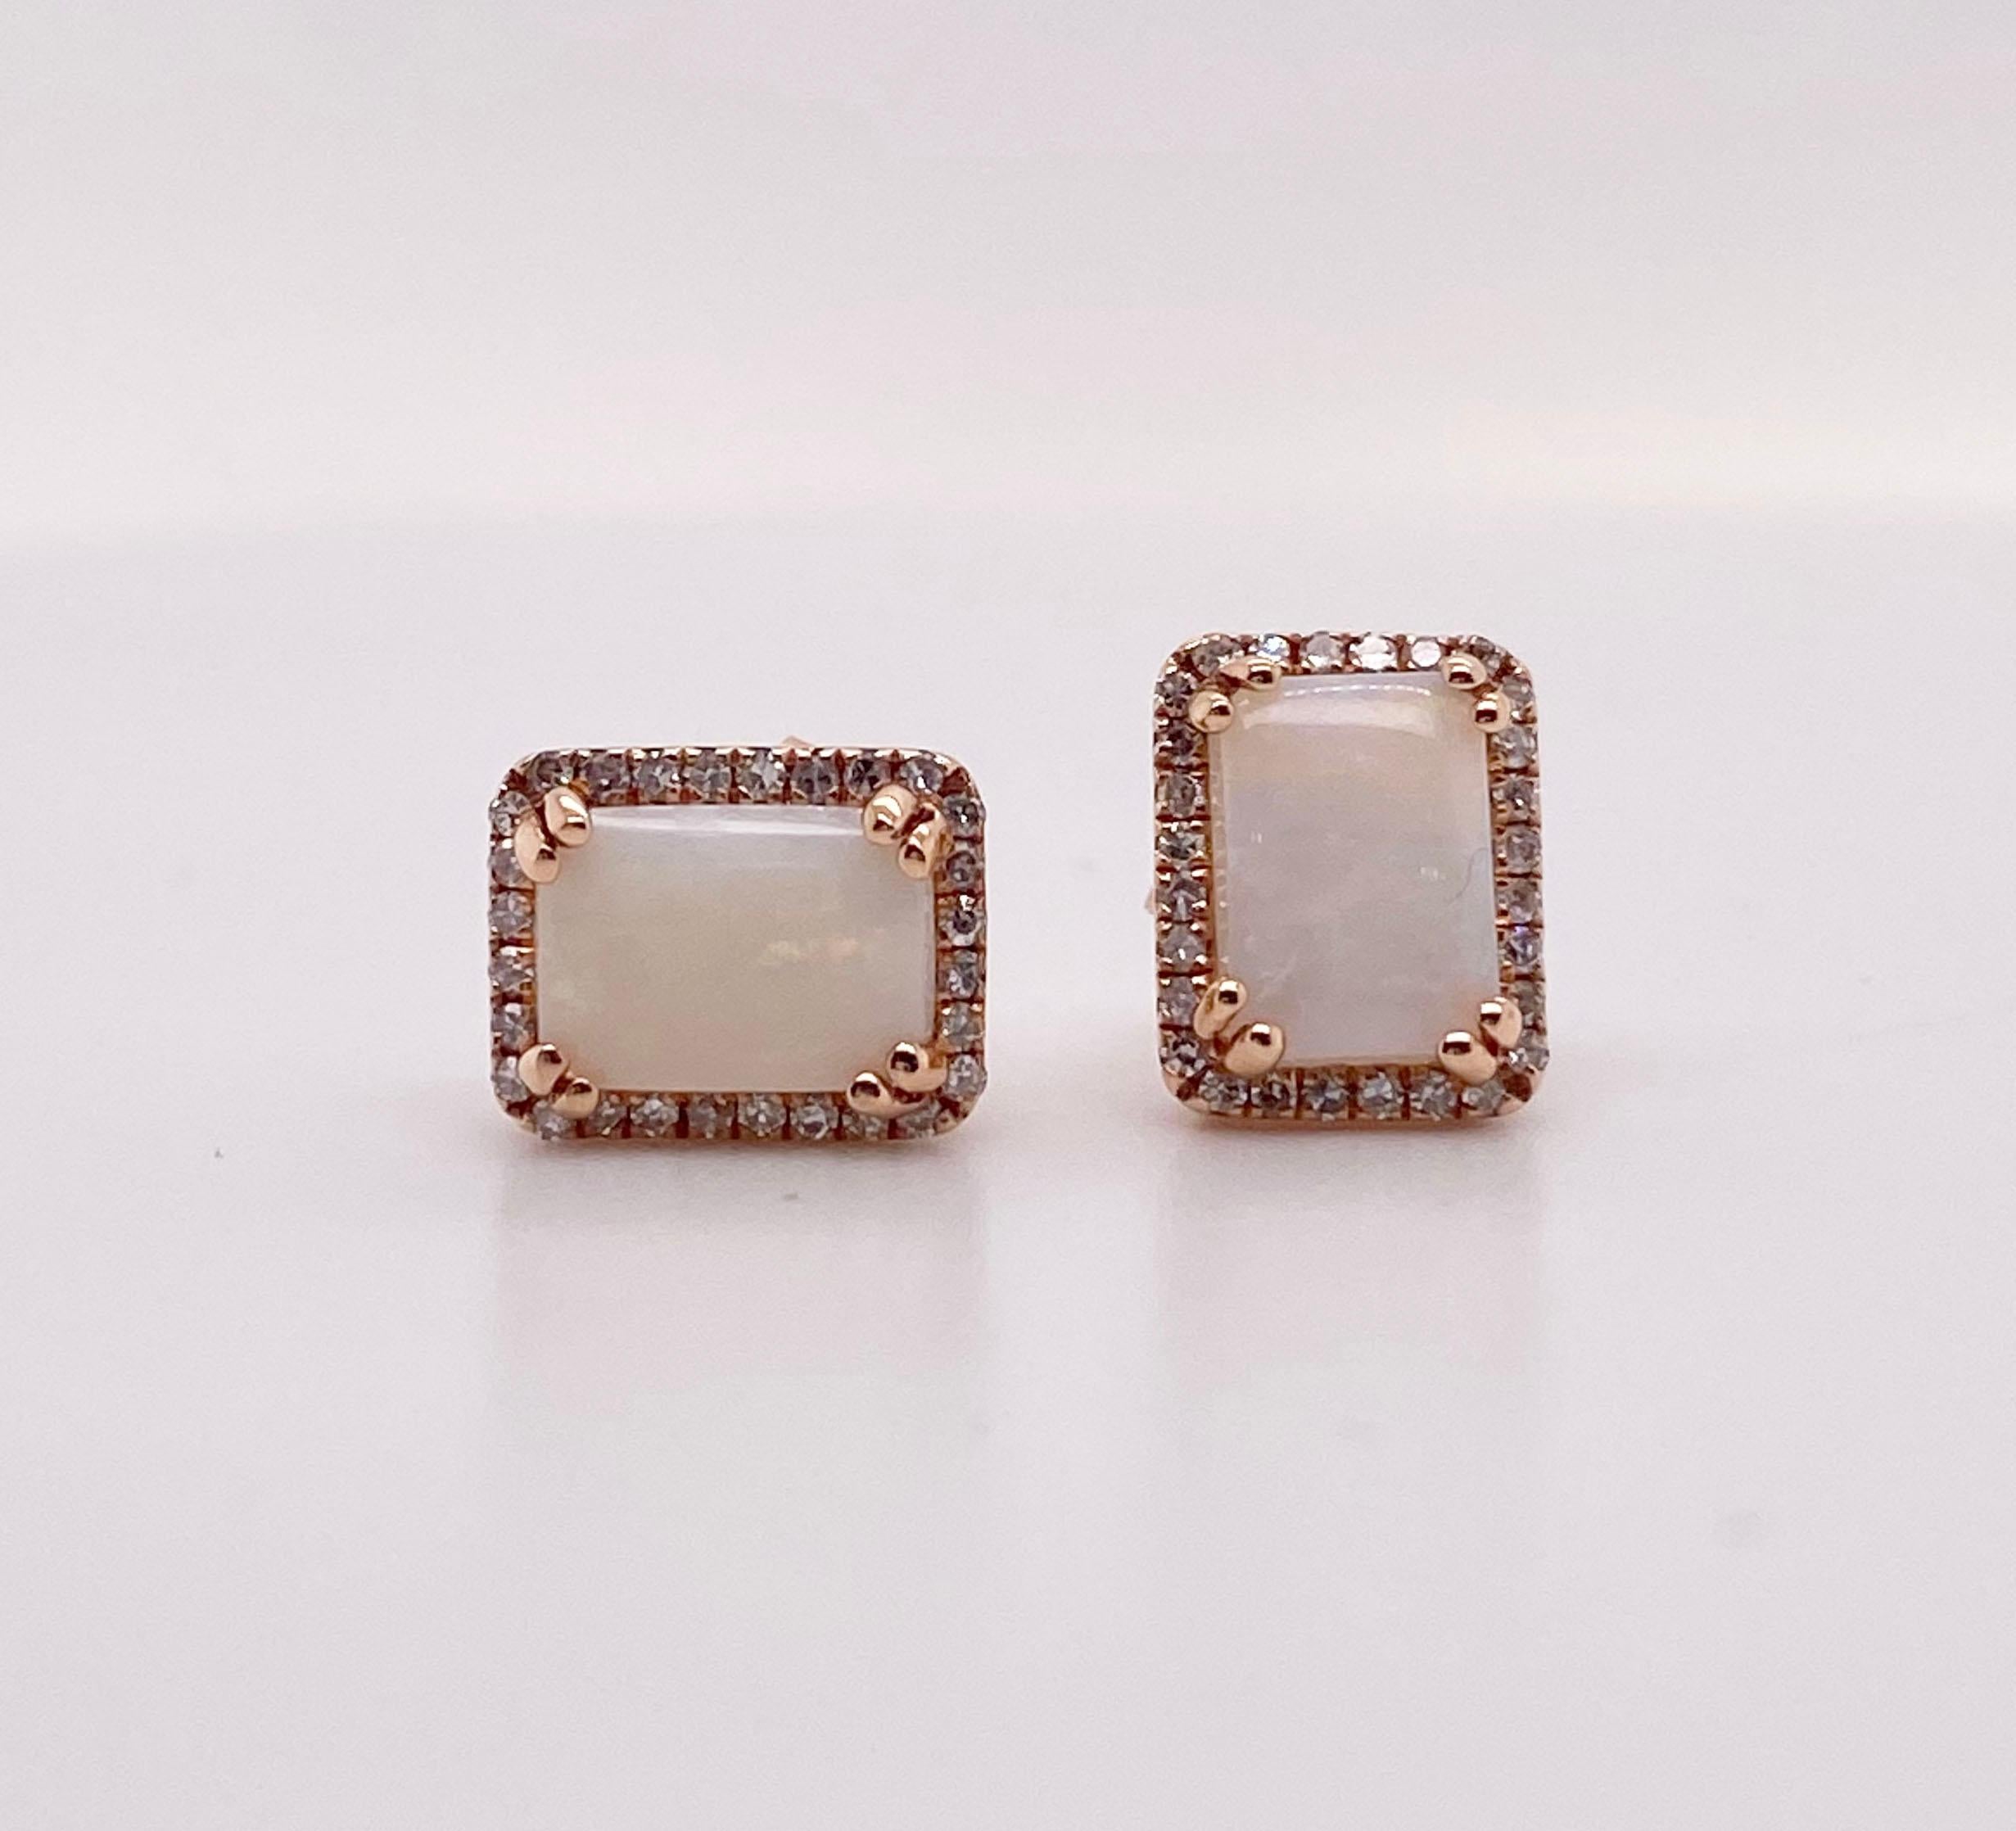 Pink and white opals look amazing in 14 karat rose gold! The post style works on anyone’s ear and the 28 diamonds enhance the design! Australian opals with natural diamonds are the perfect pairing!
The details for these gorgeous earrings are listed